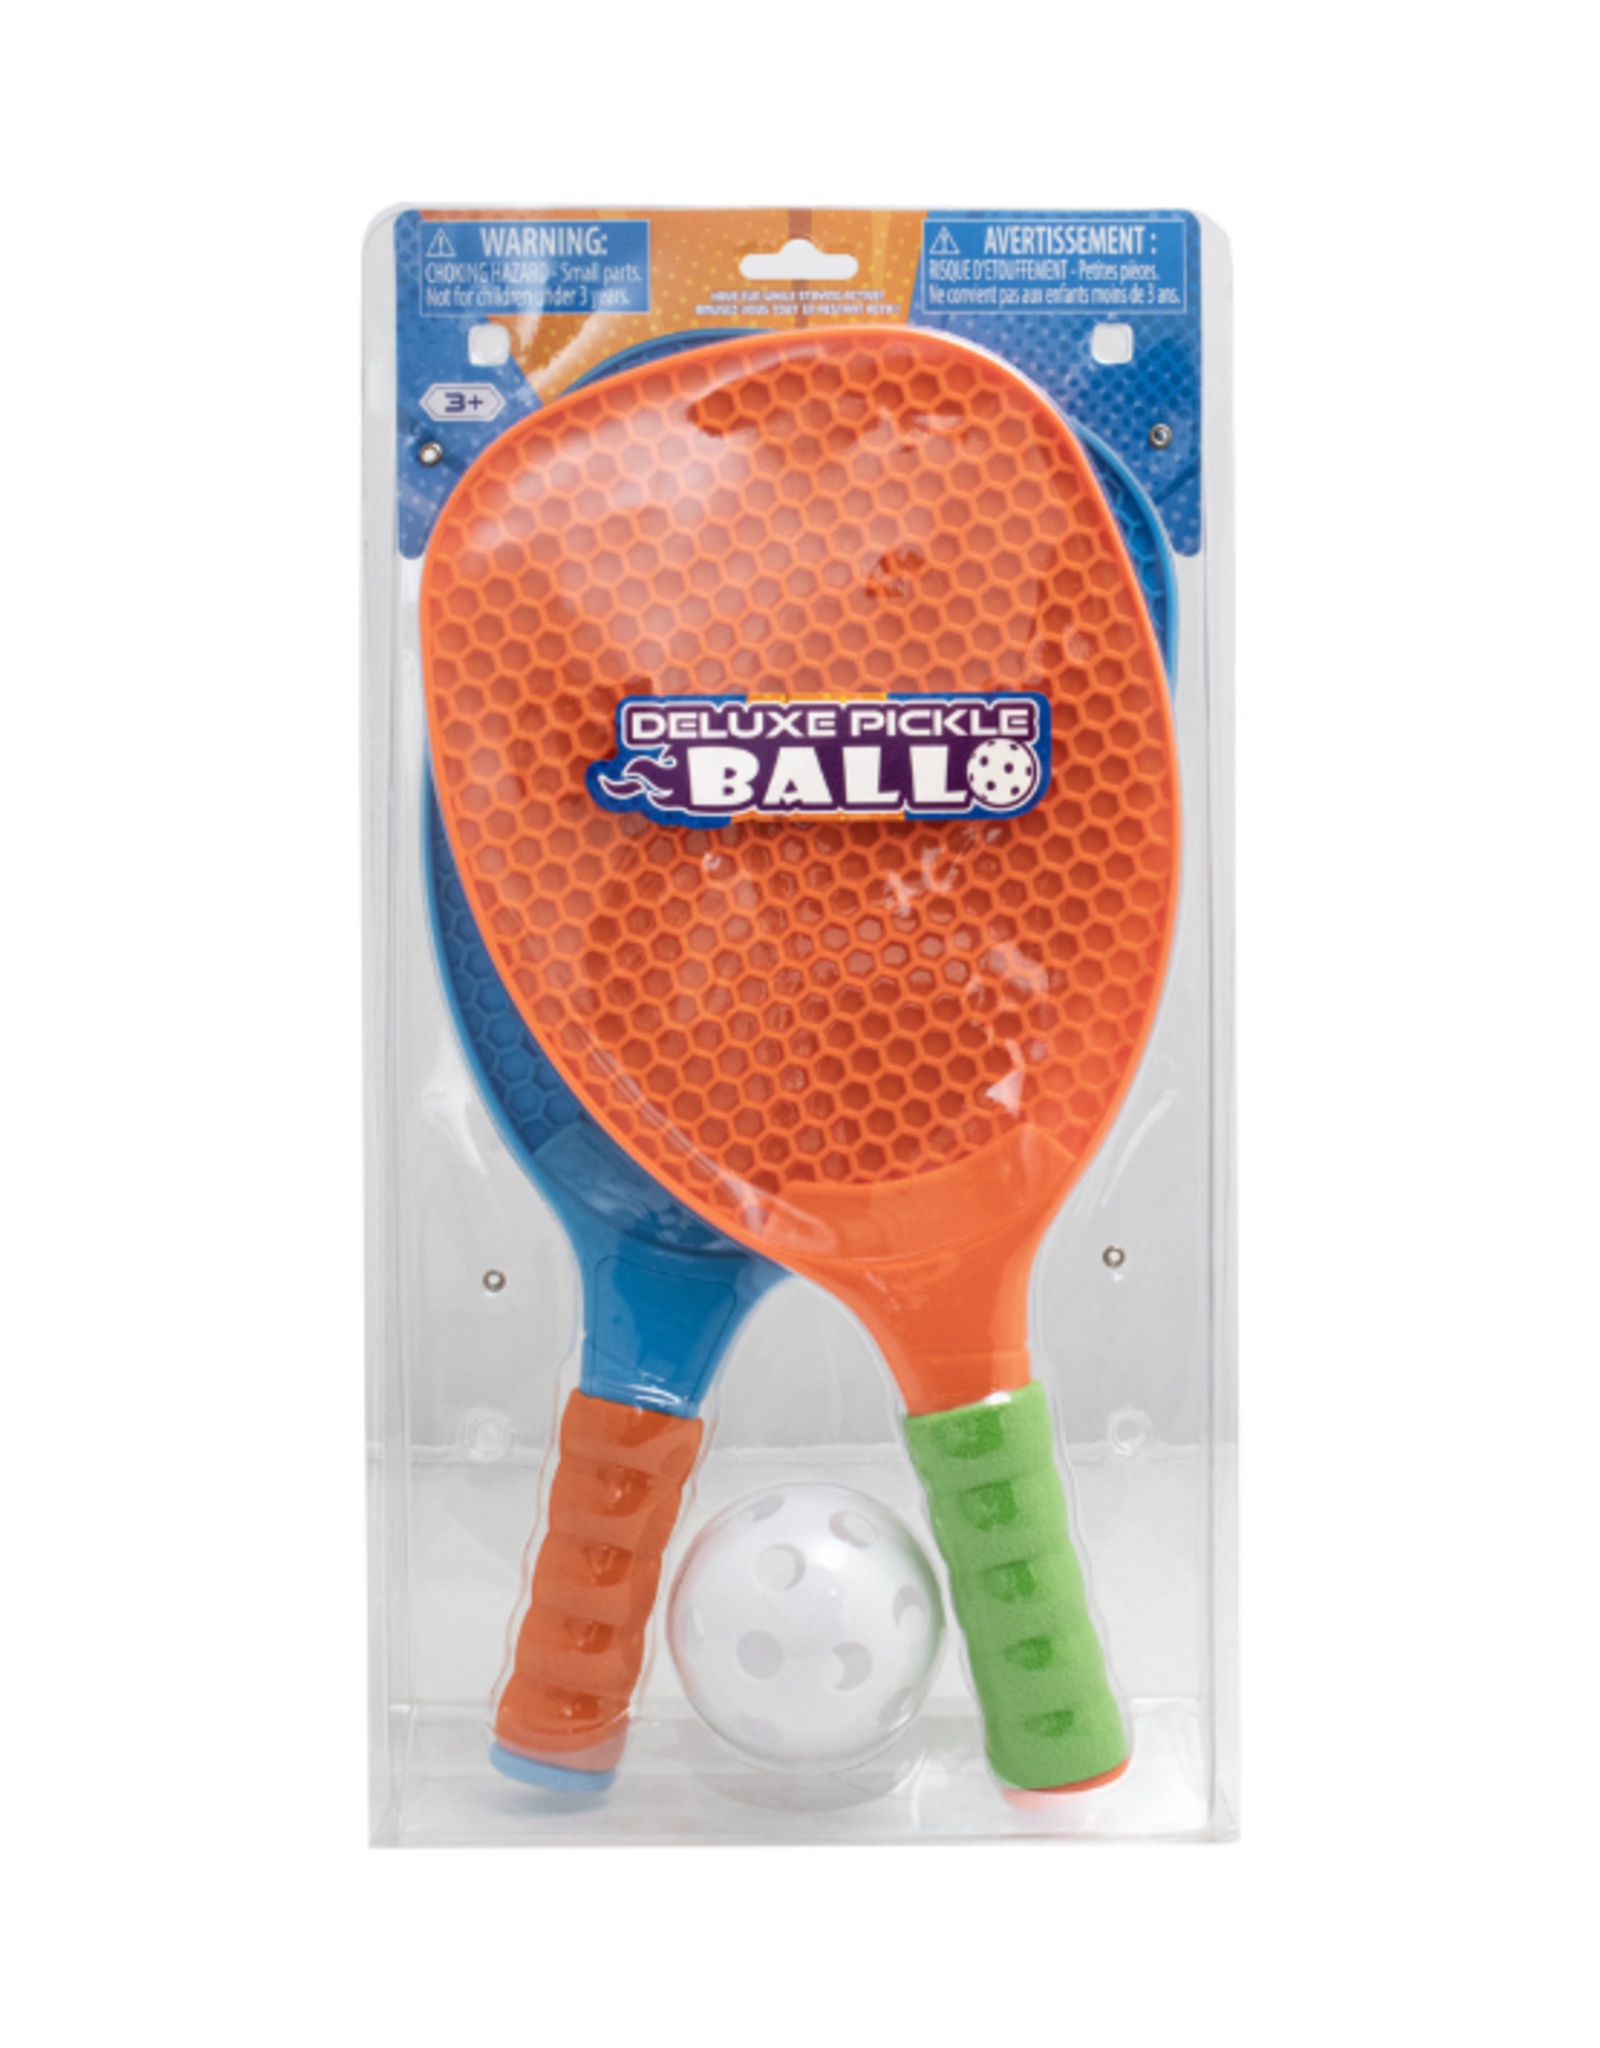 Deluxe Pickle Ball Set